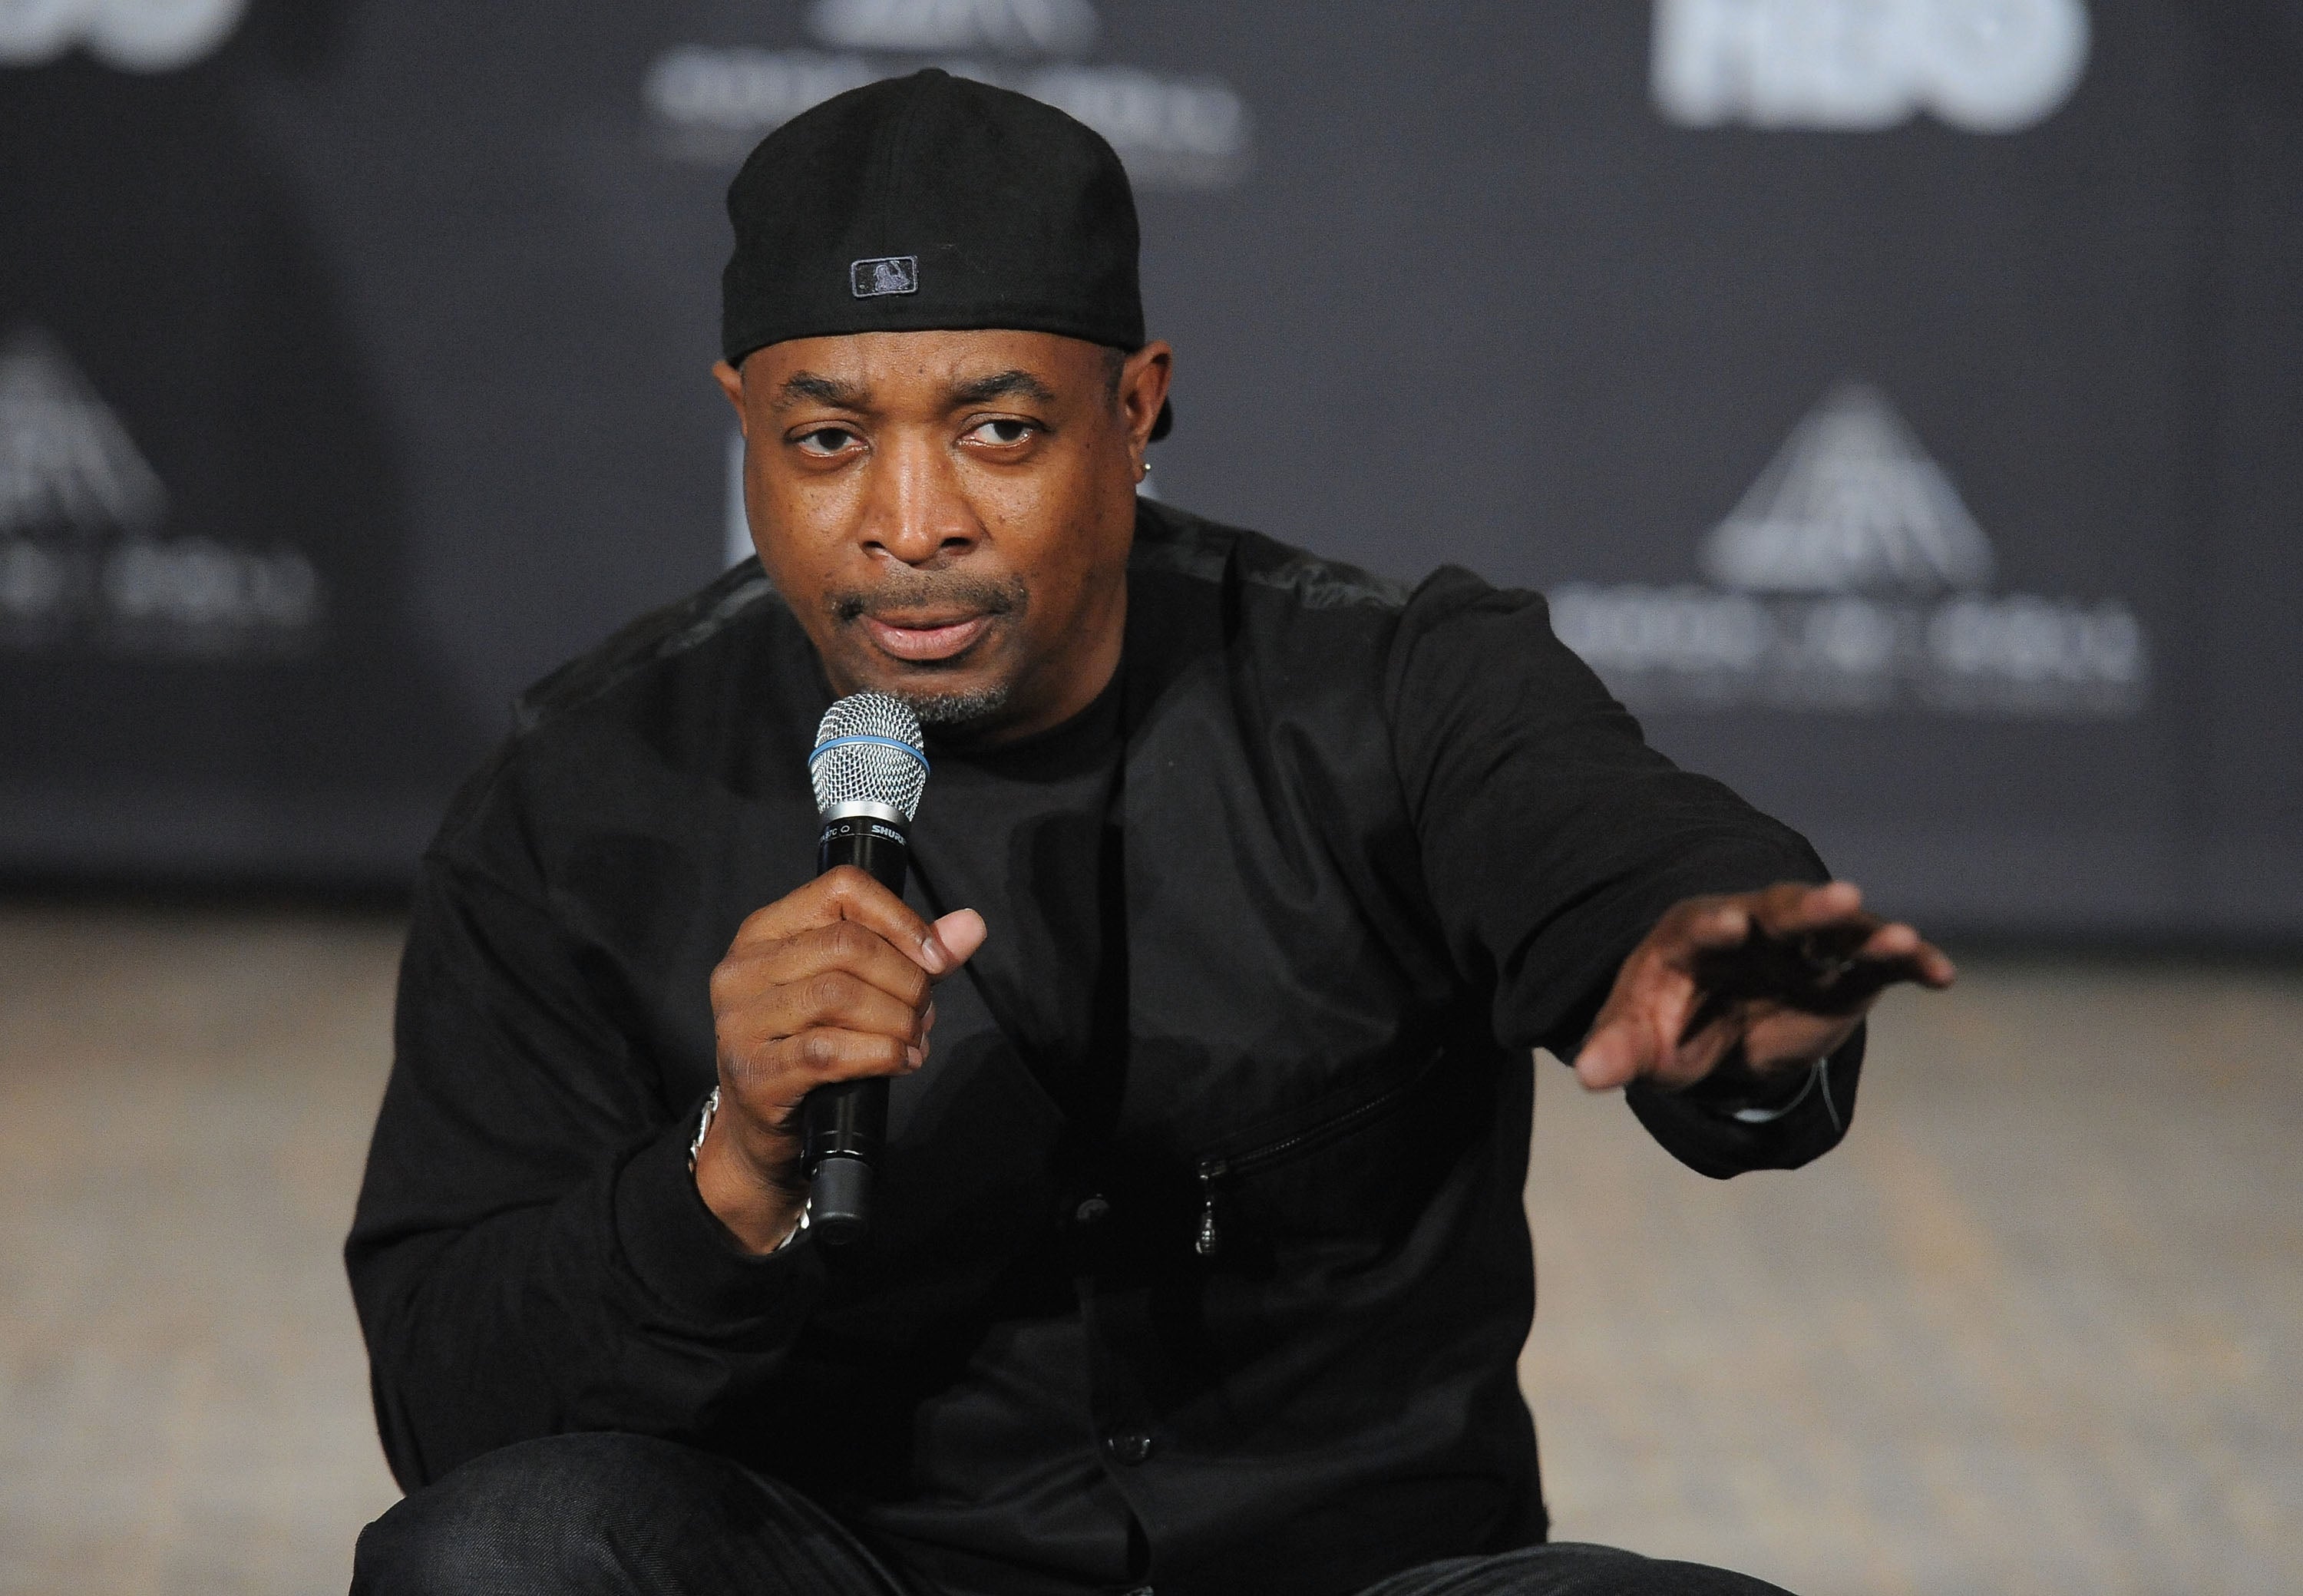 US rapper Chuck D has called for a decrease in the use of the N-word on radio and at festivals